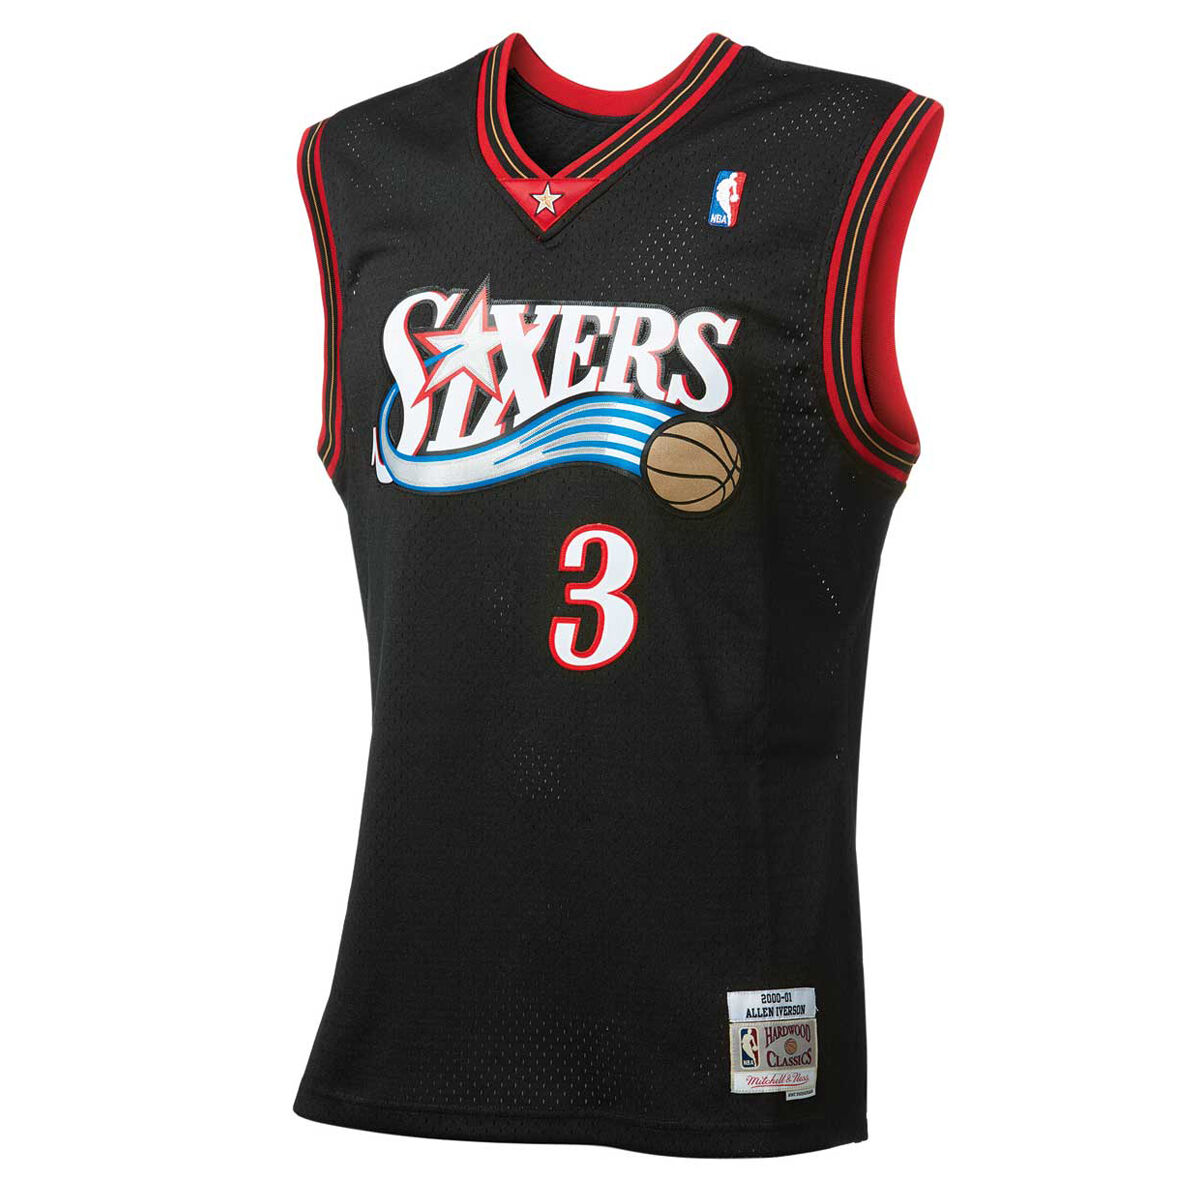 2001 sixers jersey